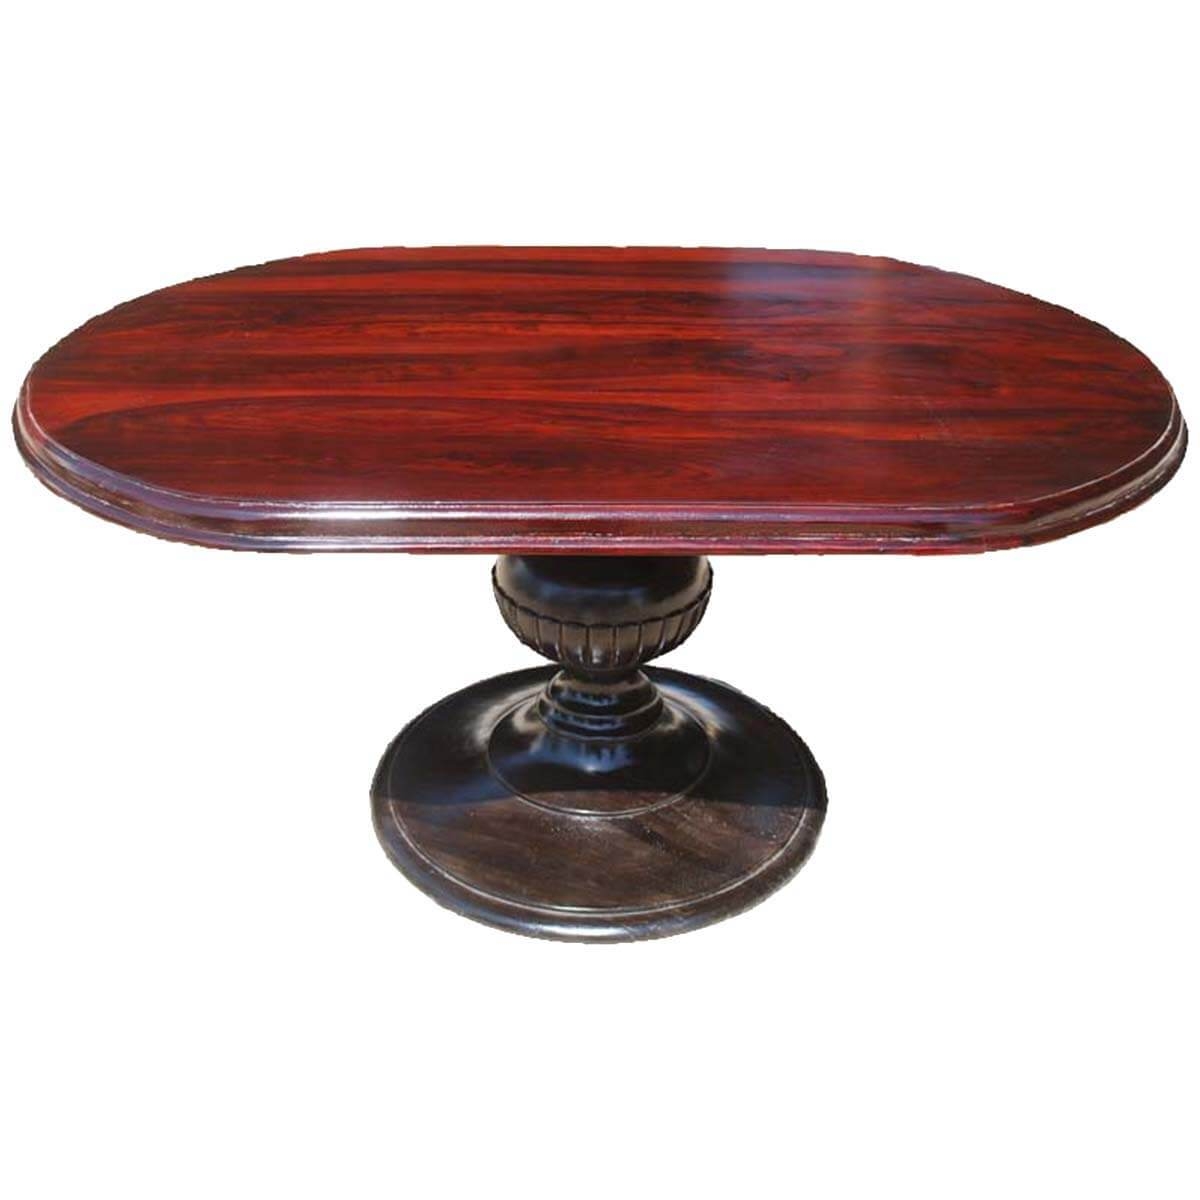 Oval dining table for 6 23